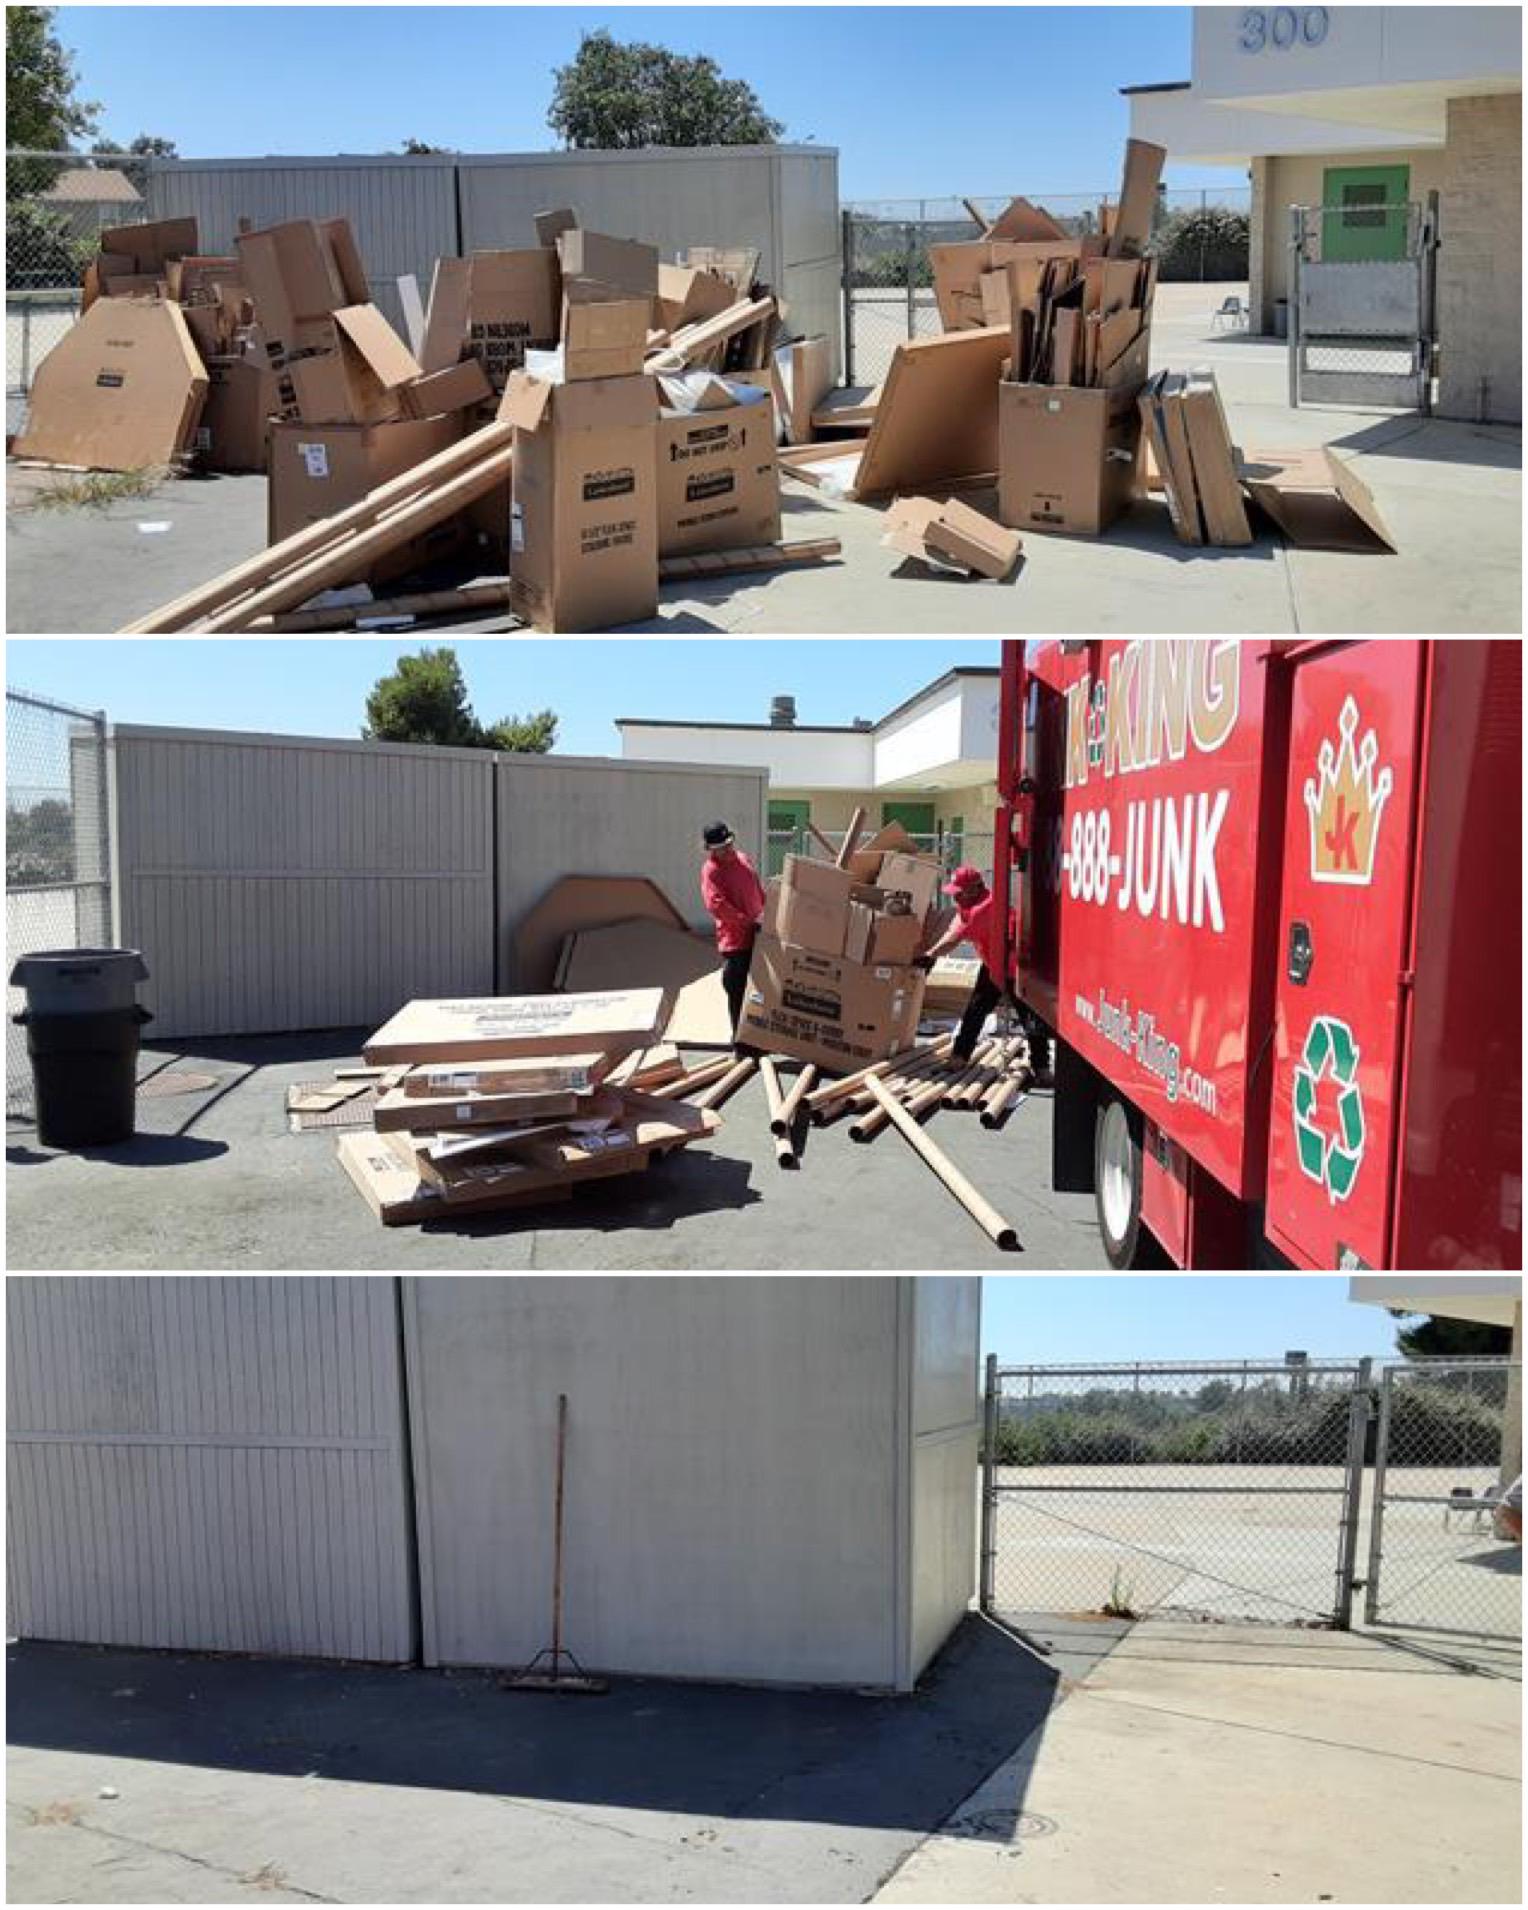 Our Junk King team working hard to complete a commercial junk removal job. The team works together to ensure a safe and productive junk hauling job.